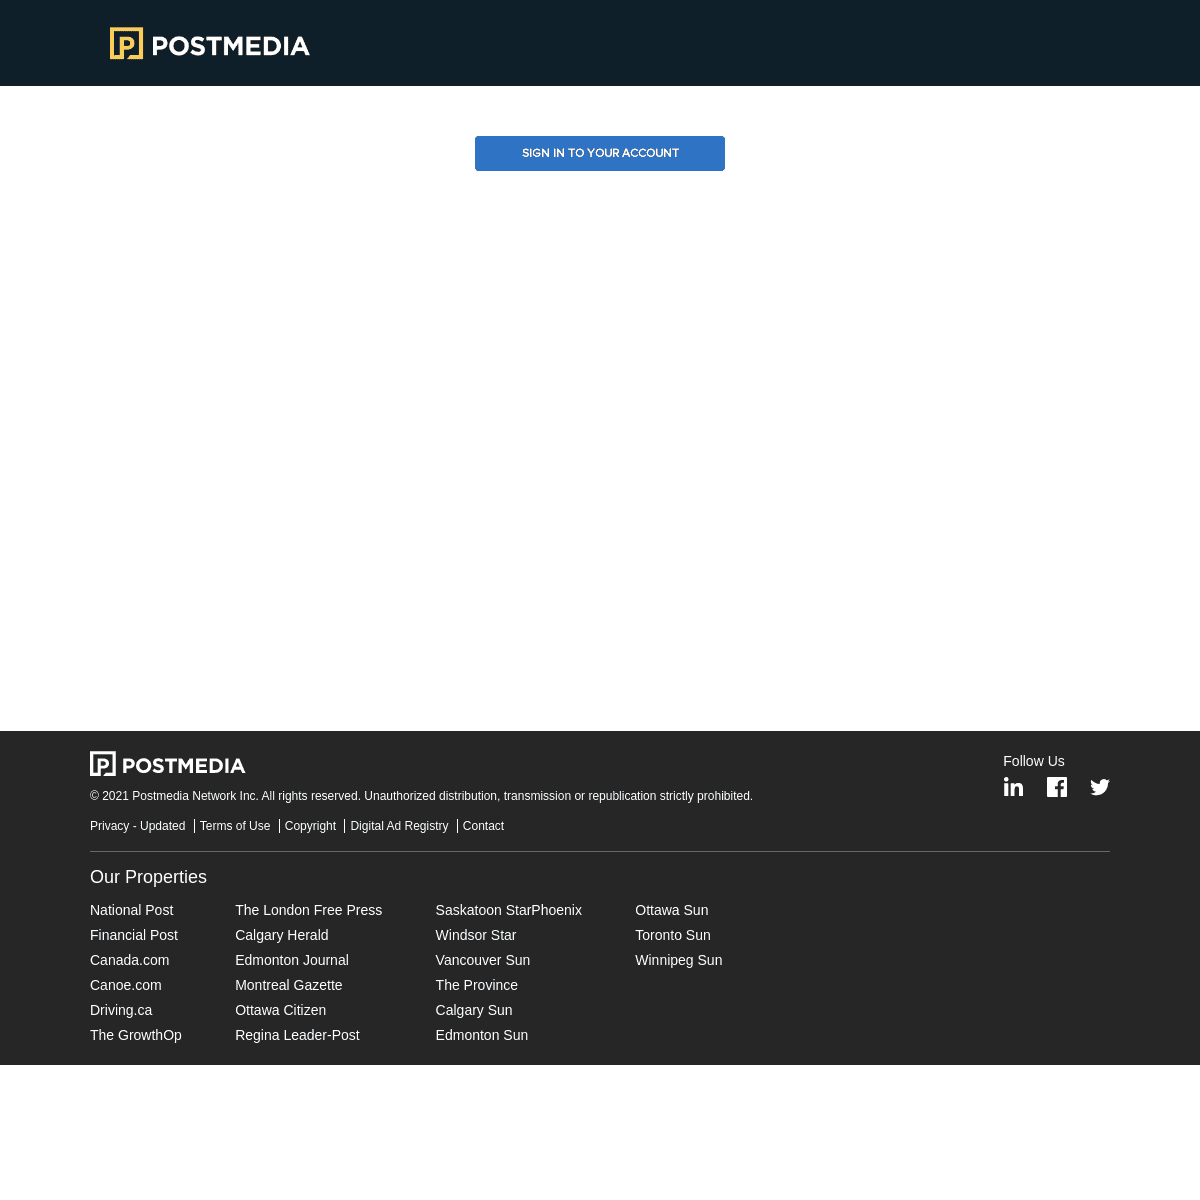 A complete backup of https://pages.postmedia.com